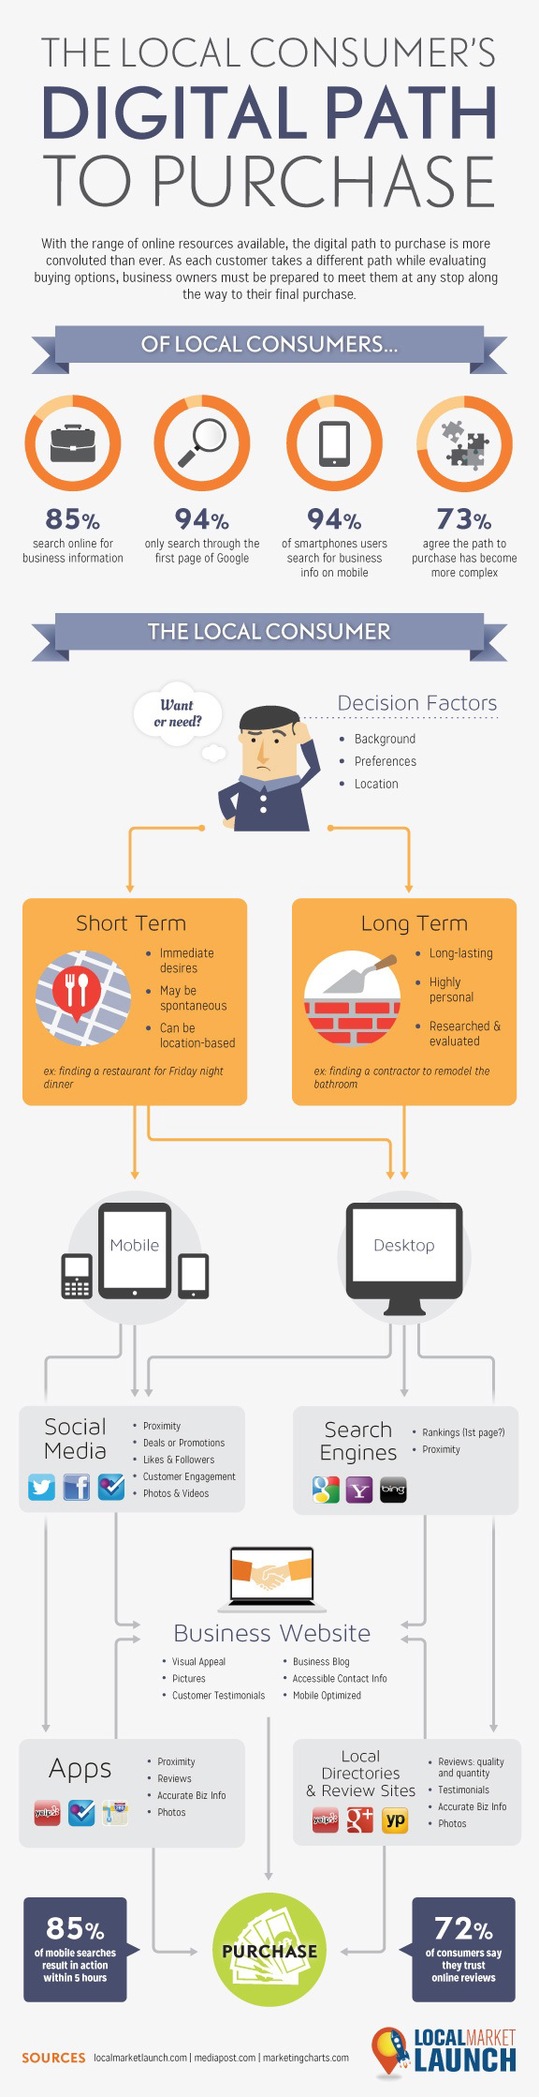 digital-path-to-purchase-infographic-copy.jpg